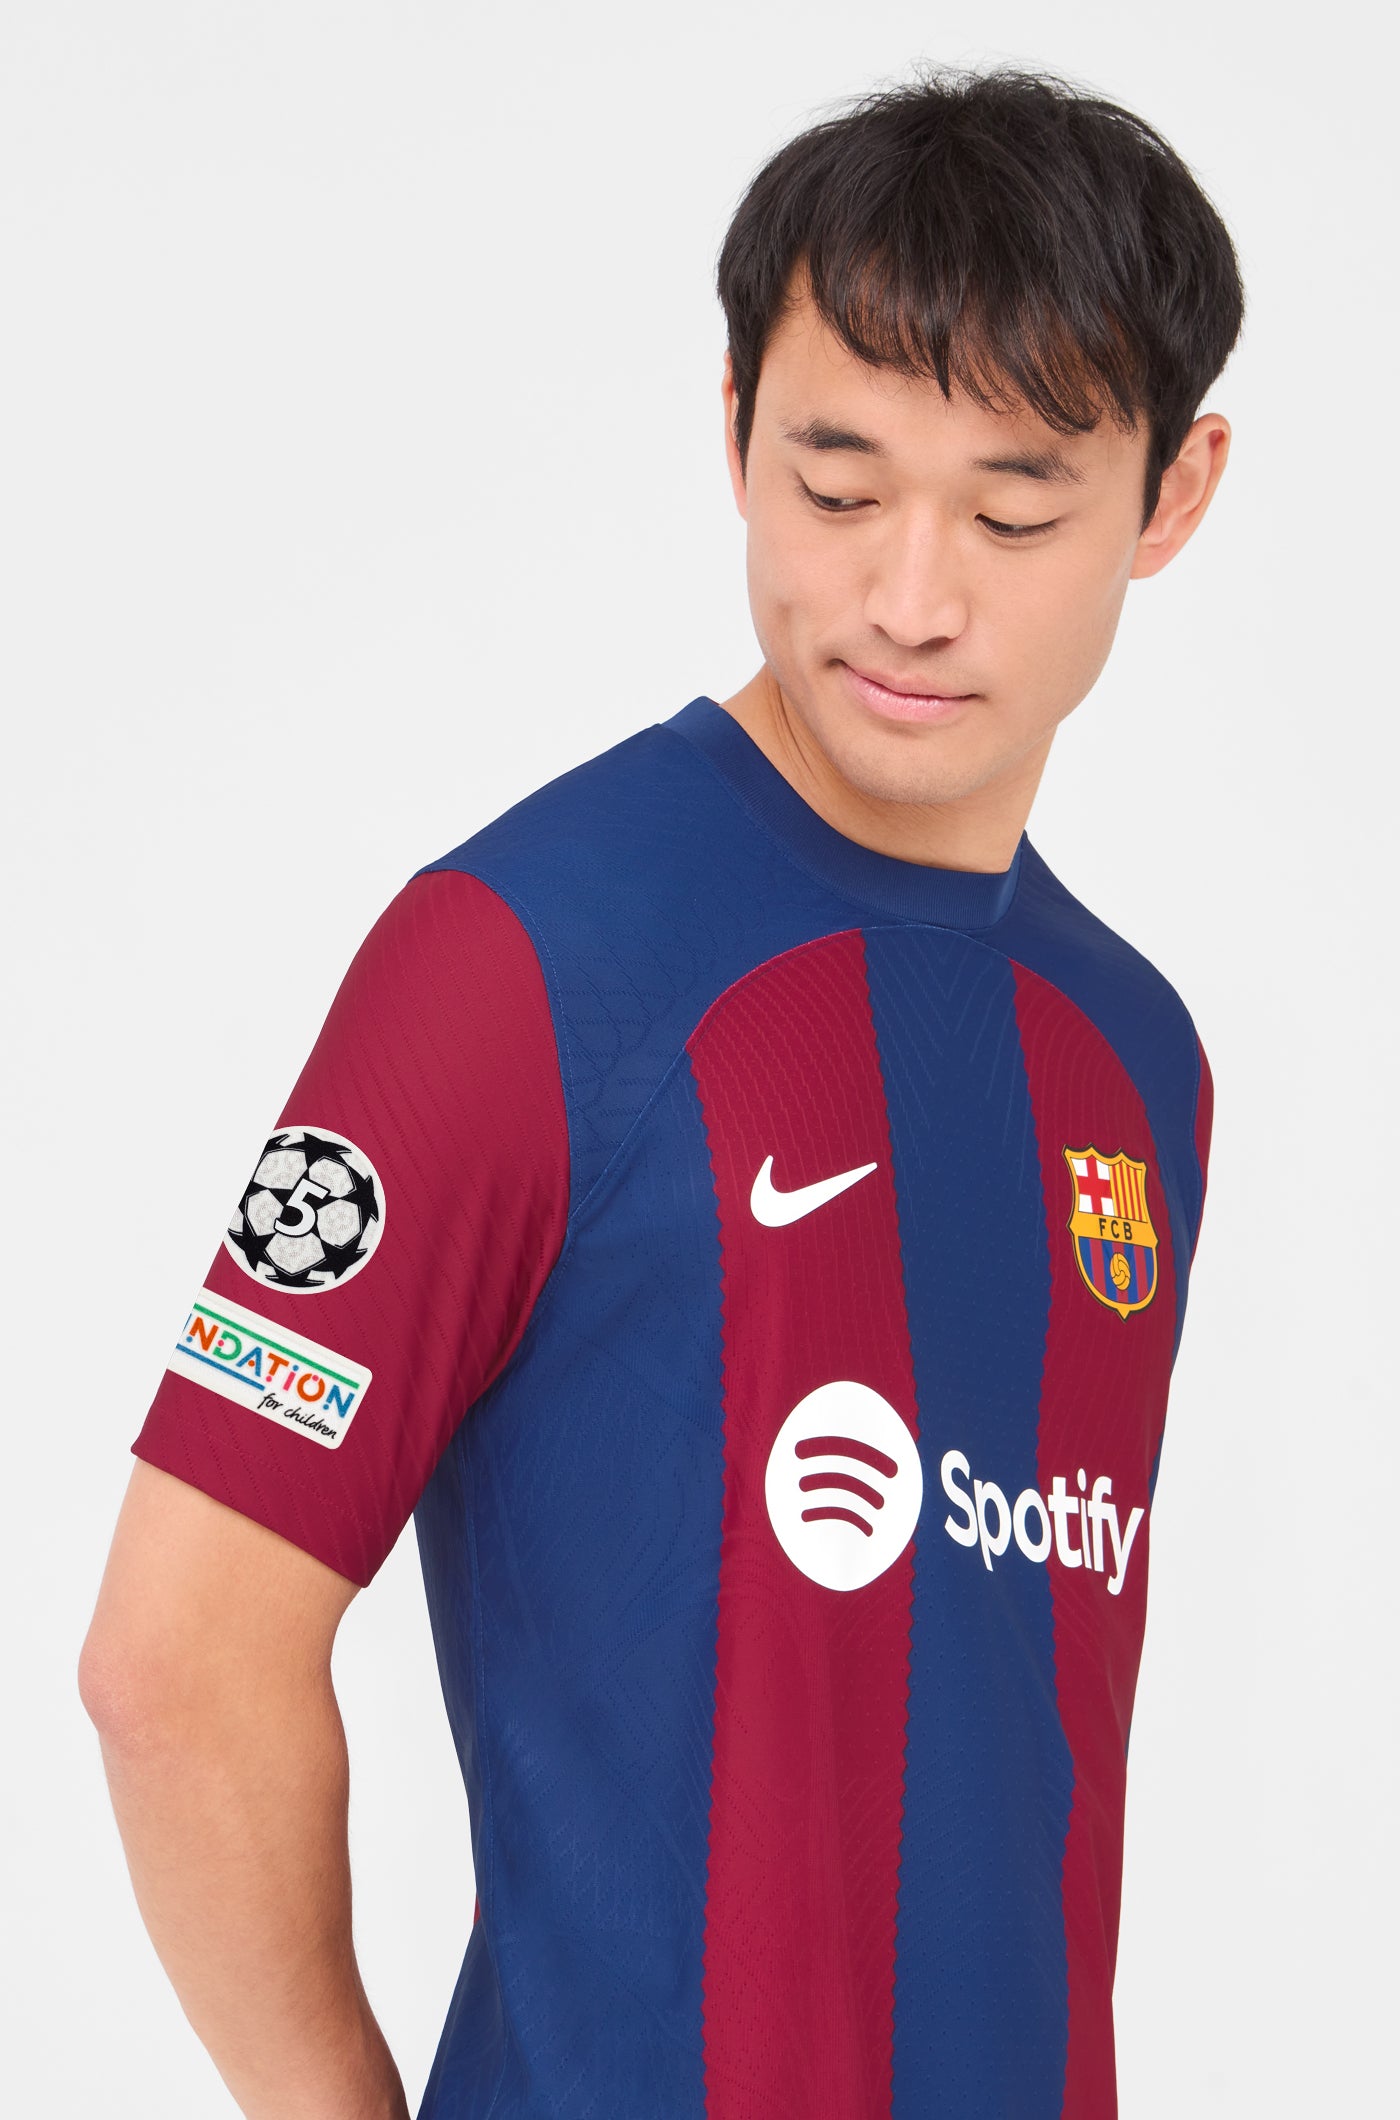 UCL FC Barcelona home shirt 23/24 Player's Edition